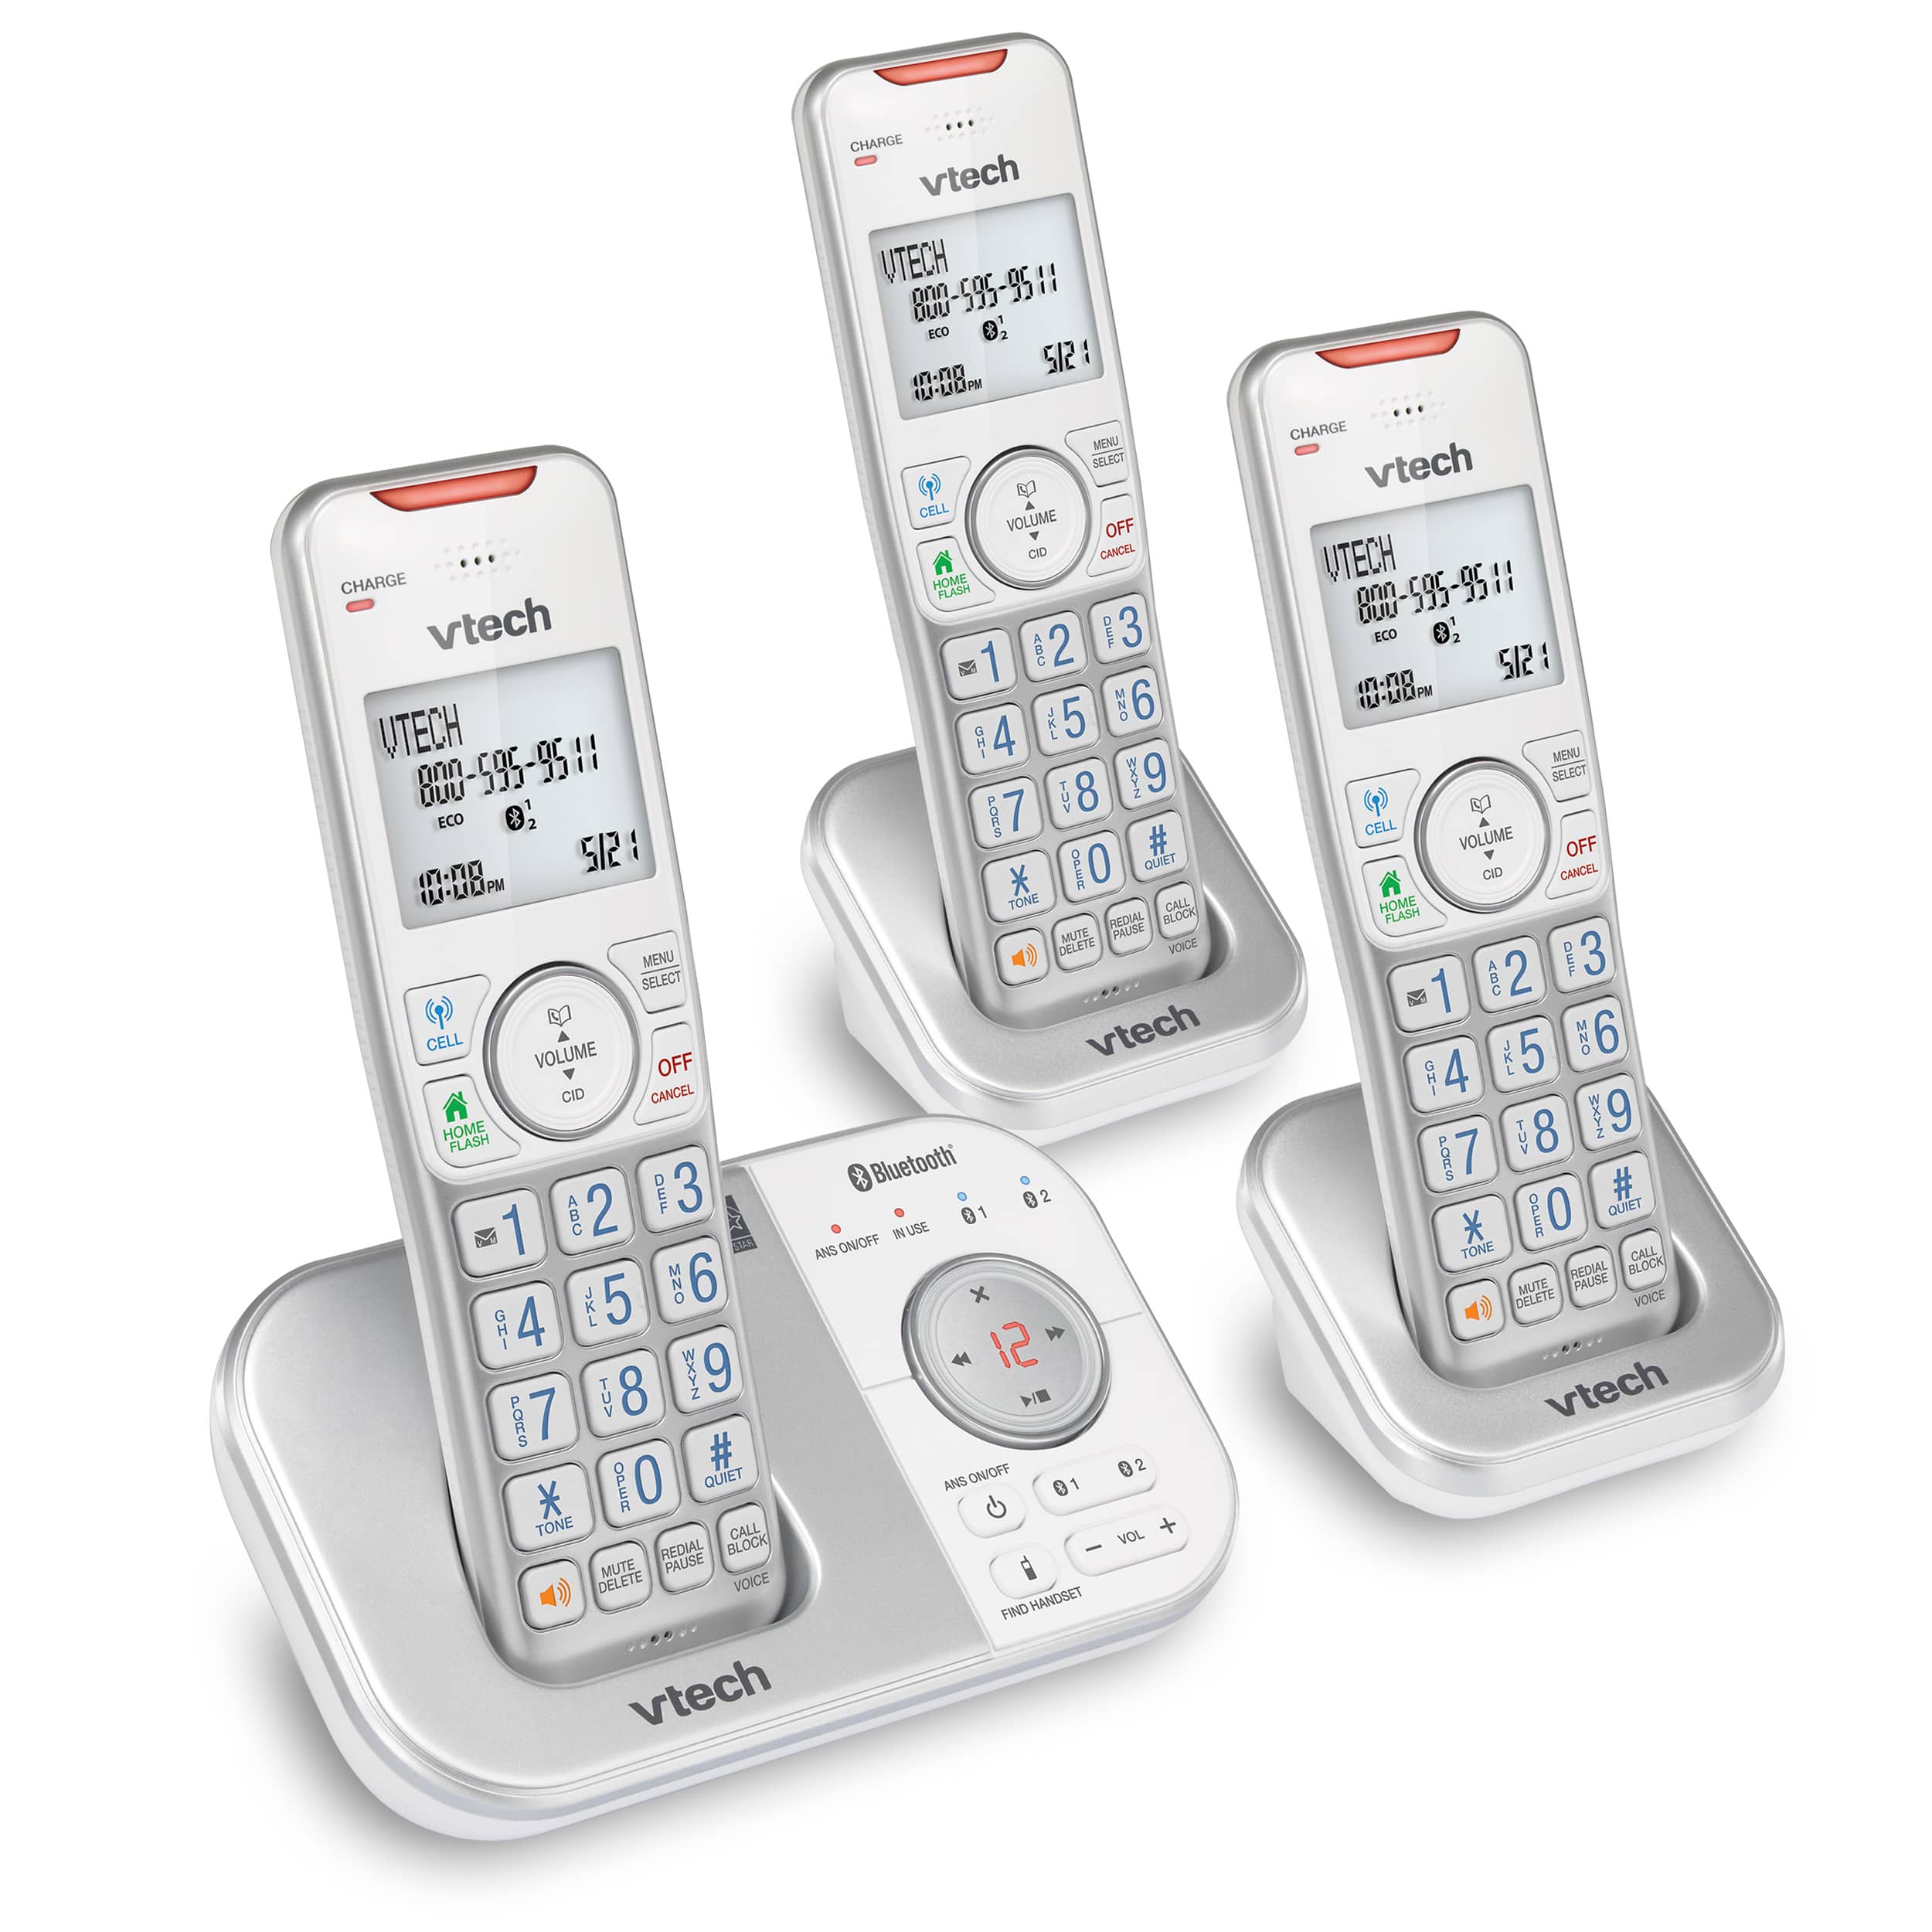 3-Handset Expandable Cordless Phone with Bluetooth Connect to Cell, Smart Call Blocker and Answering System (Silver & White)